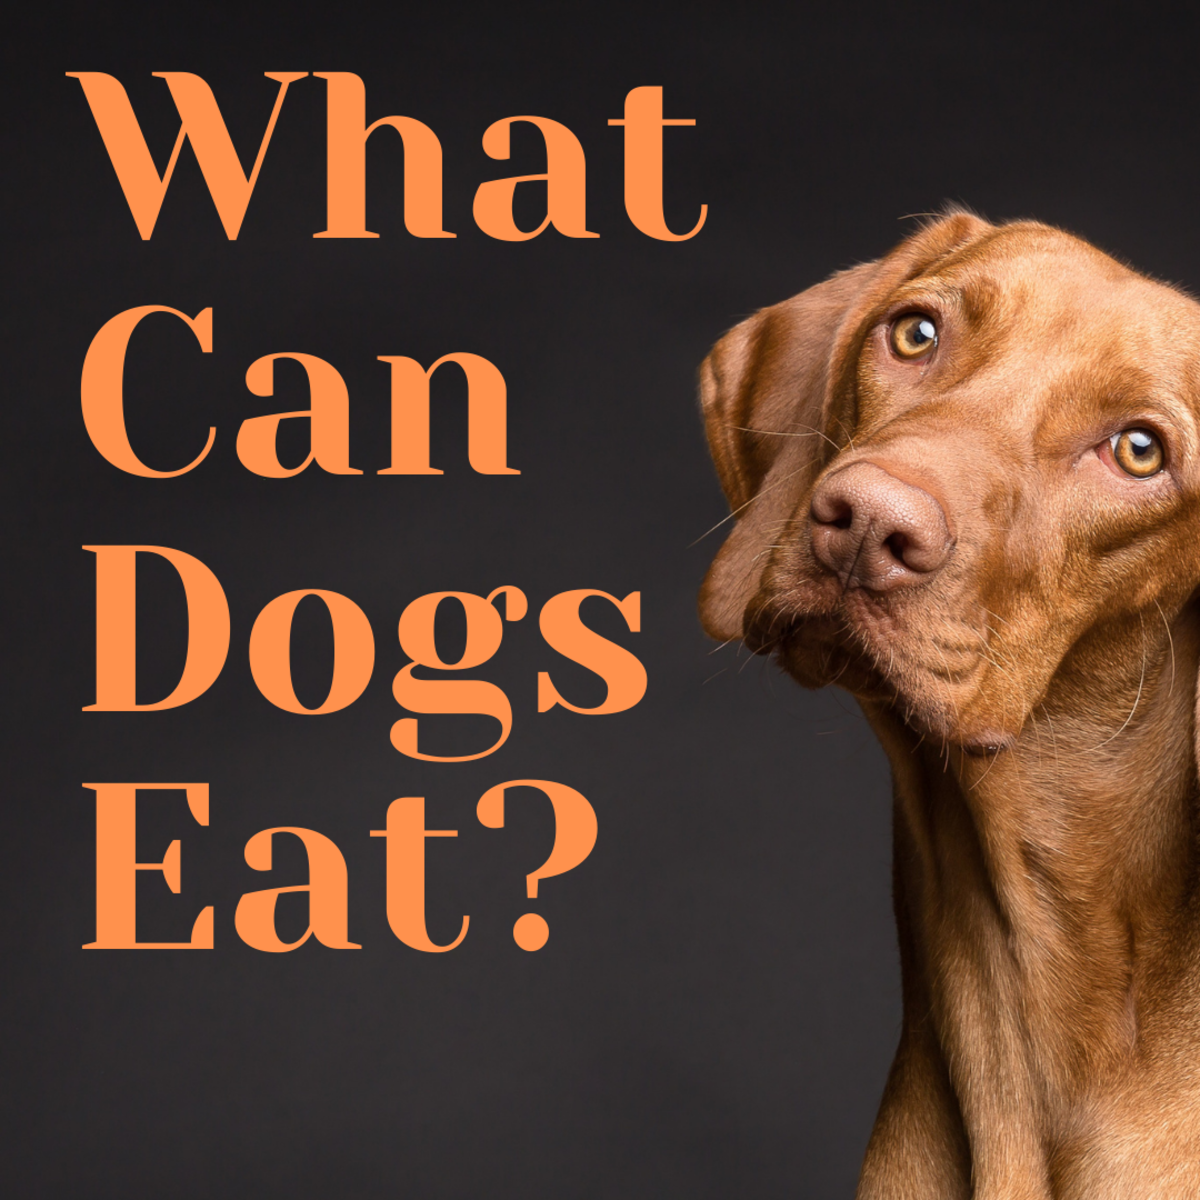 What Can Dogs Eat?